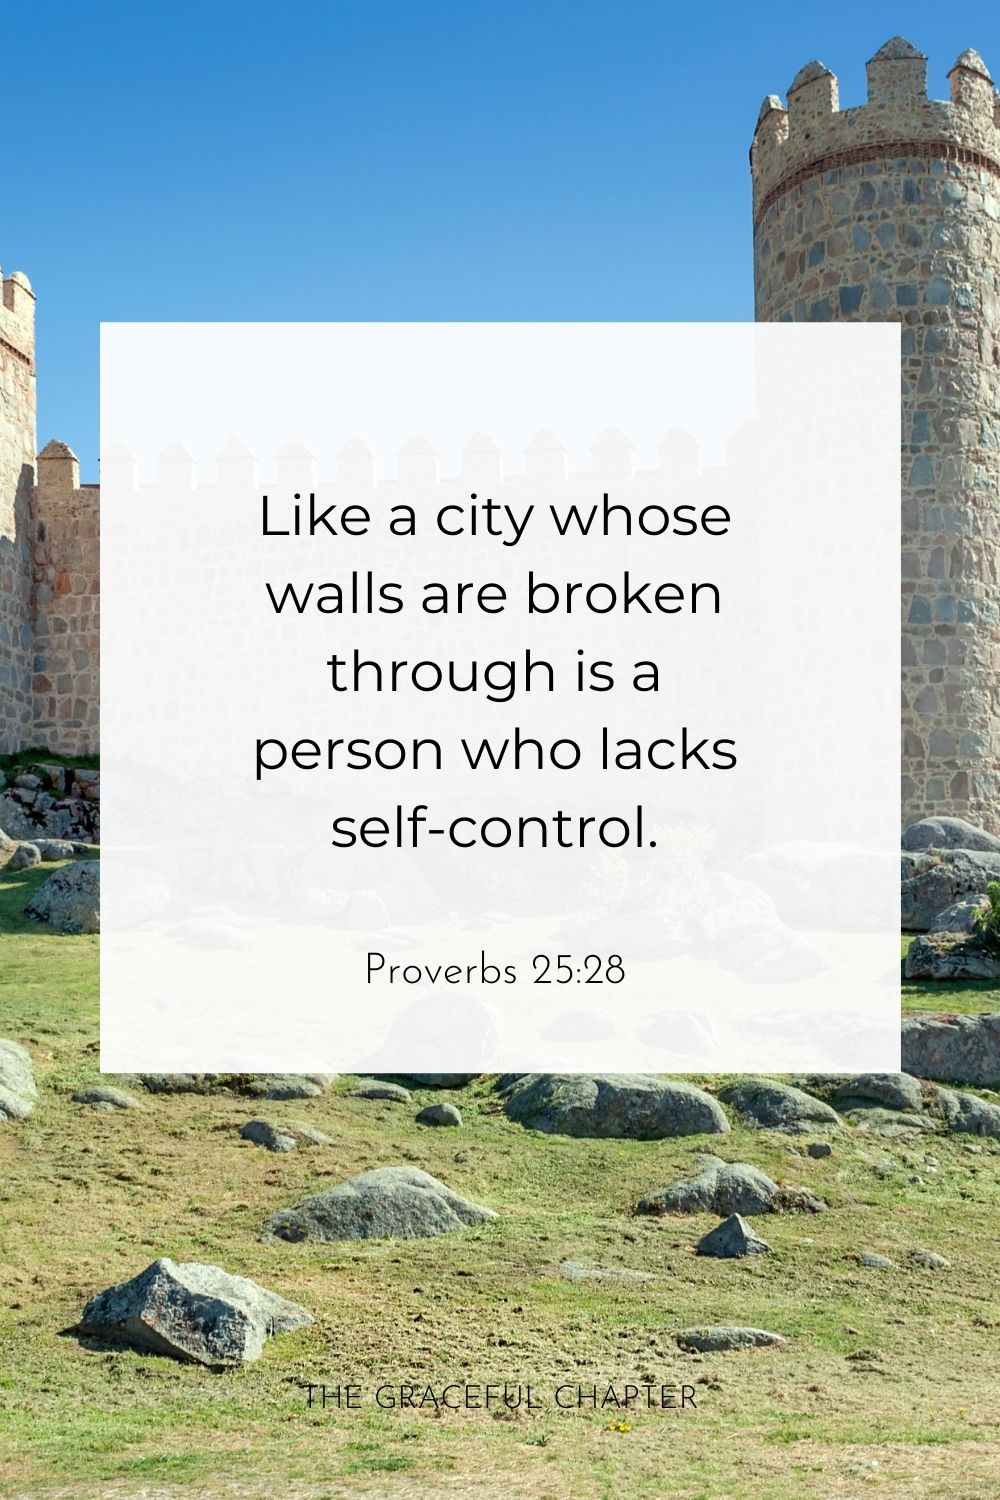 Like a city whose walls are broken through is a person who lacks self-control. Proverbs 25:28